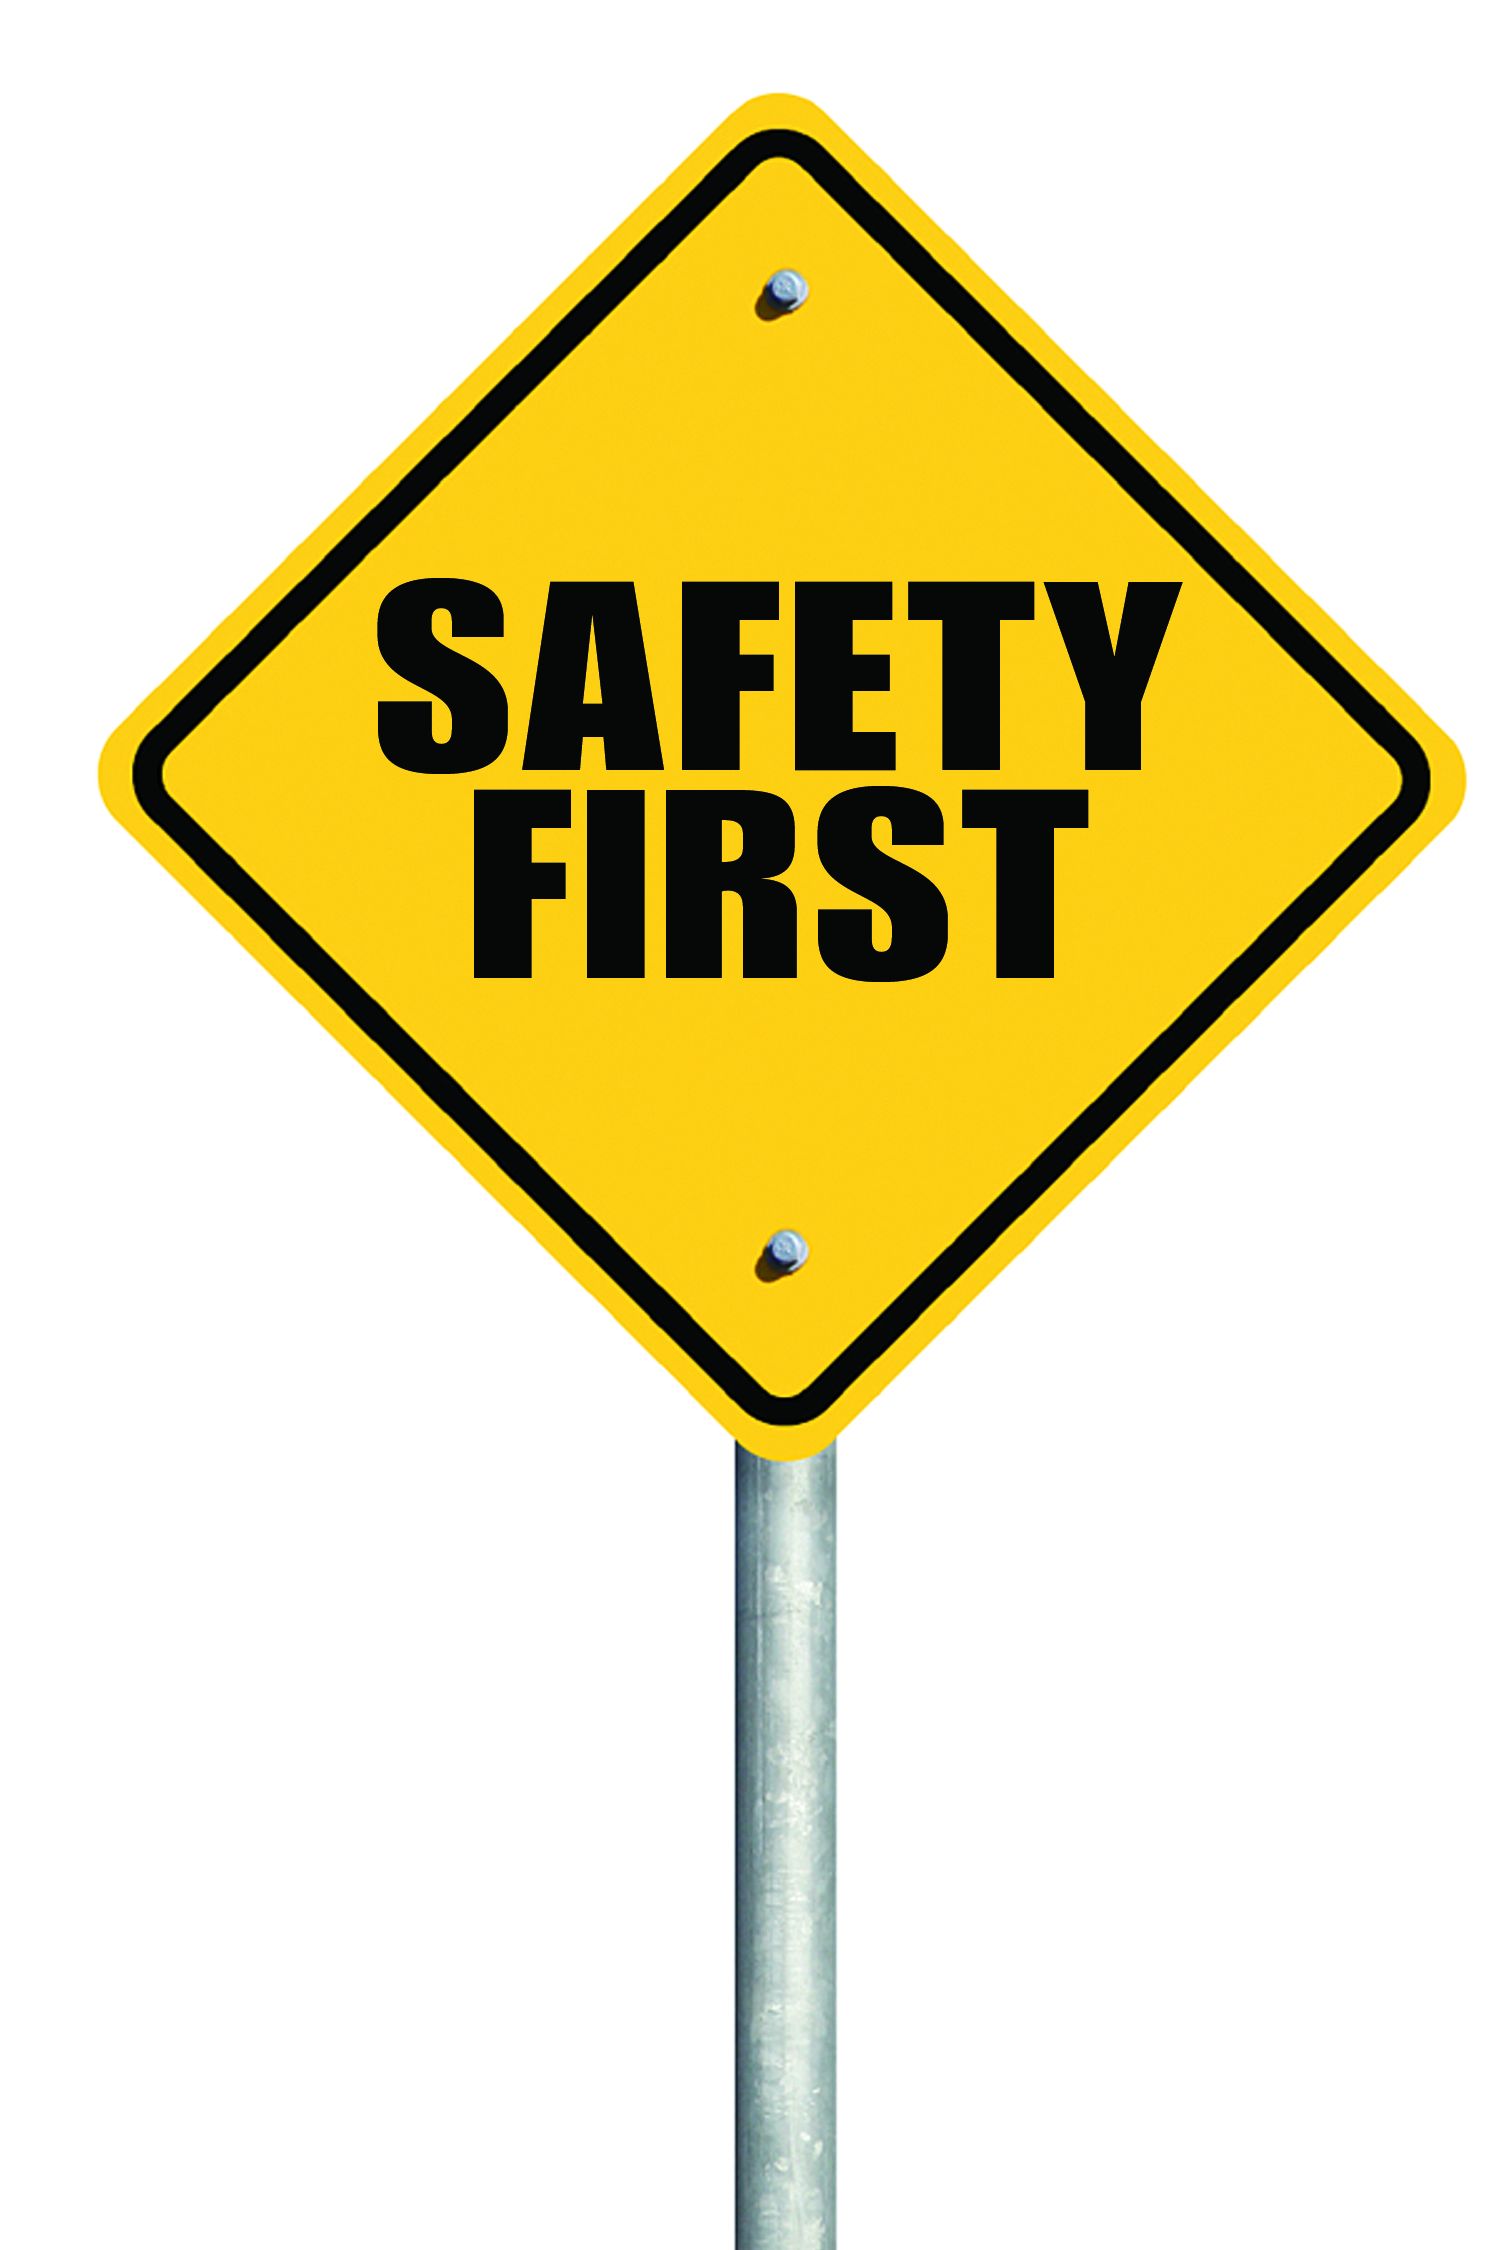 Parts And Service In The New Safety Environment Article